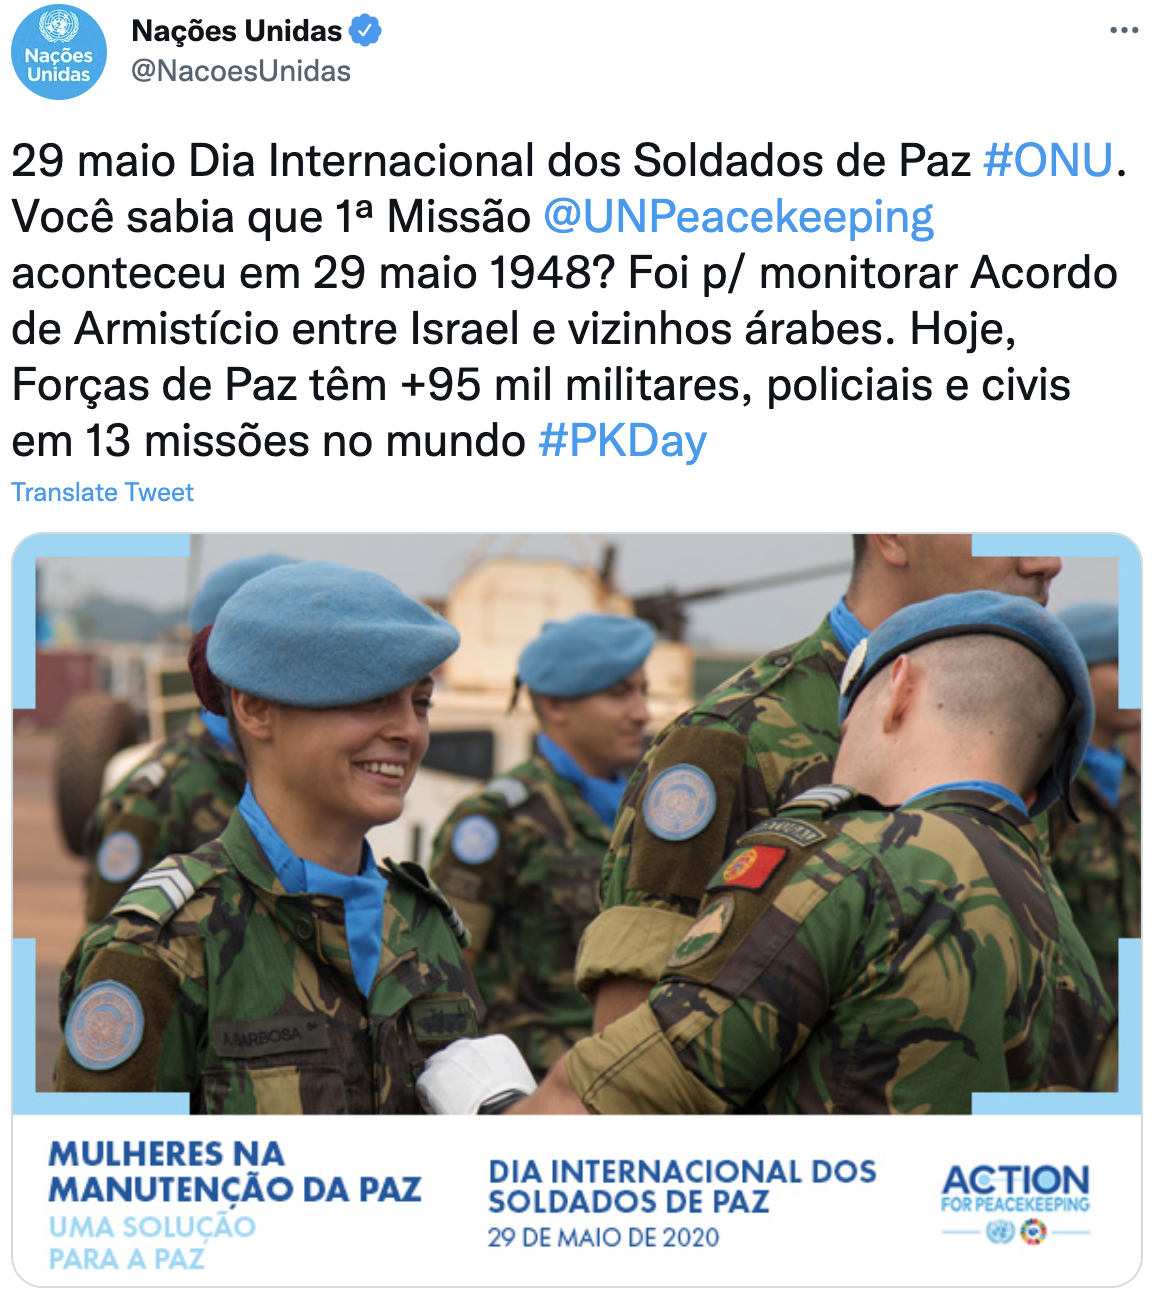 Tweet thanking peackeepers in Portuguese.